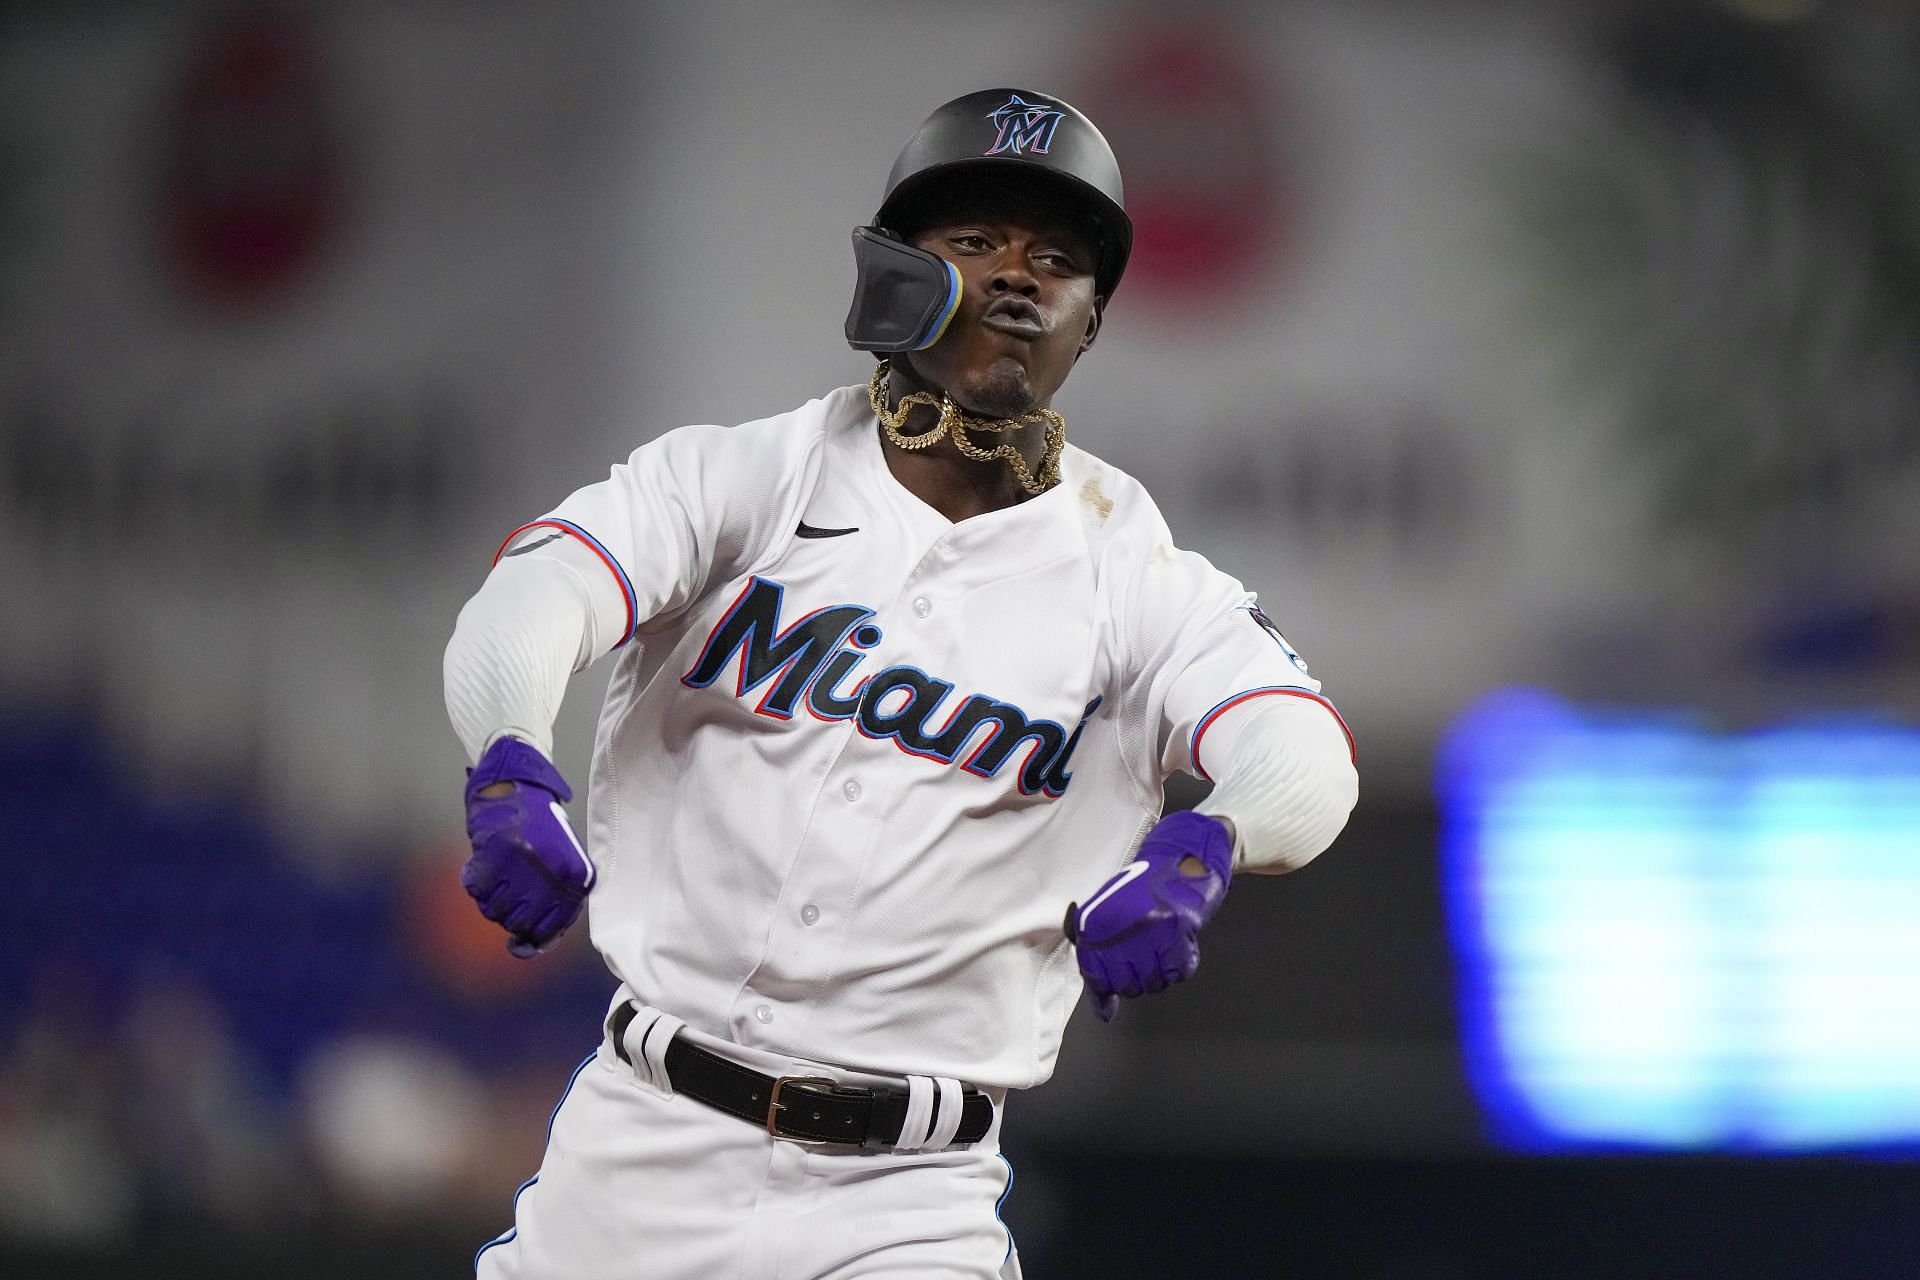 MLB Twitter reacts to report Miami Marlins are likely stop Jazz Chisholm Jr.  from playing in World Baseball Classic: Marlins need to let him play